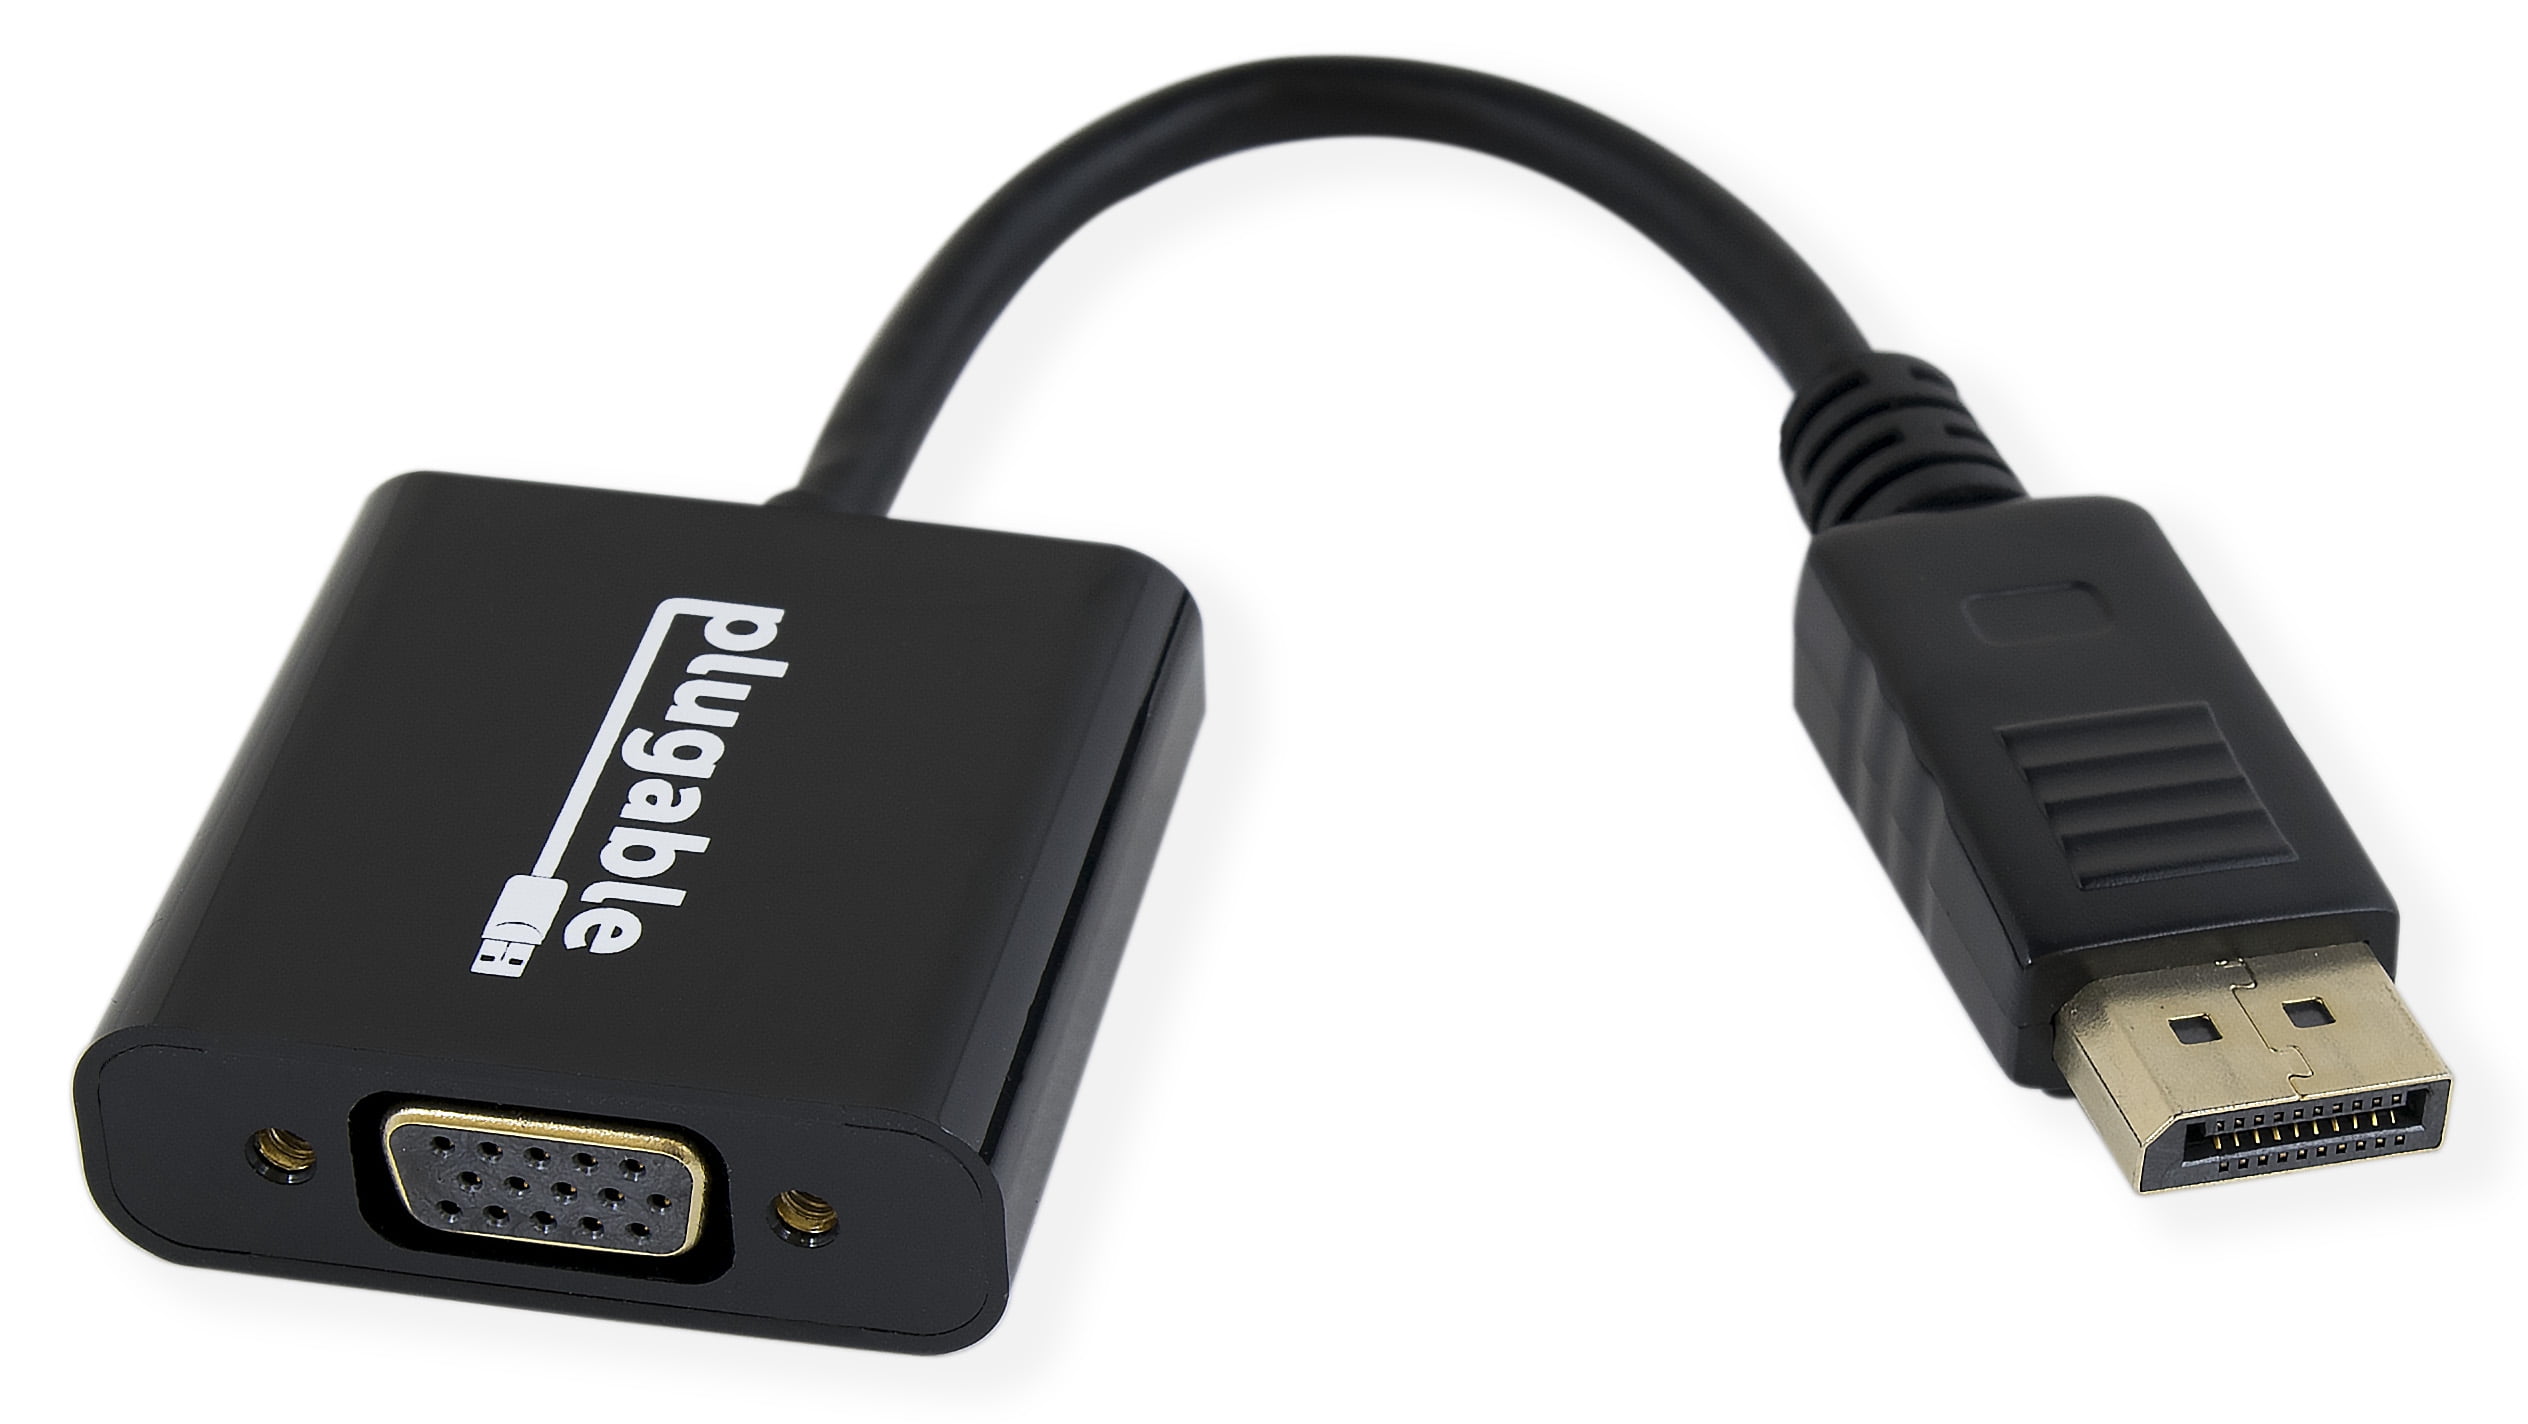 Plugable USB 3.0 to DVI/VGA/HDMI Video Graphics Adapter for Multiple  Monitors up to 2048x1152 Supports Windows 11, 10, 8.1, 7, XP, and Mac 10.14+